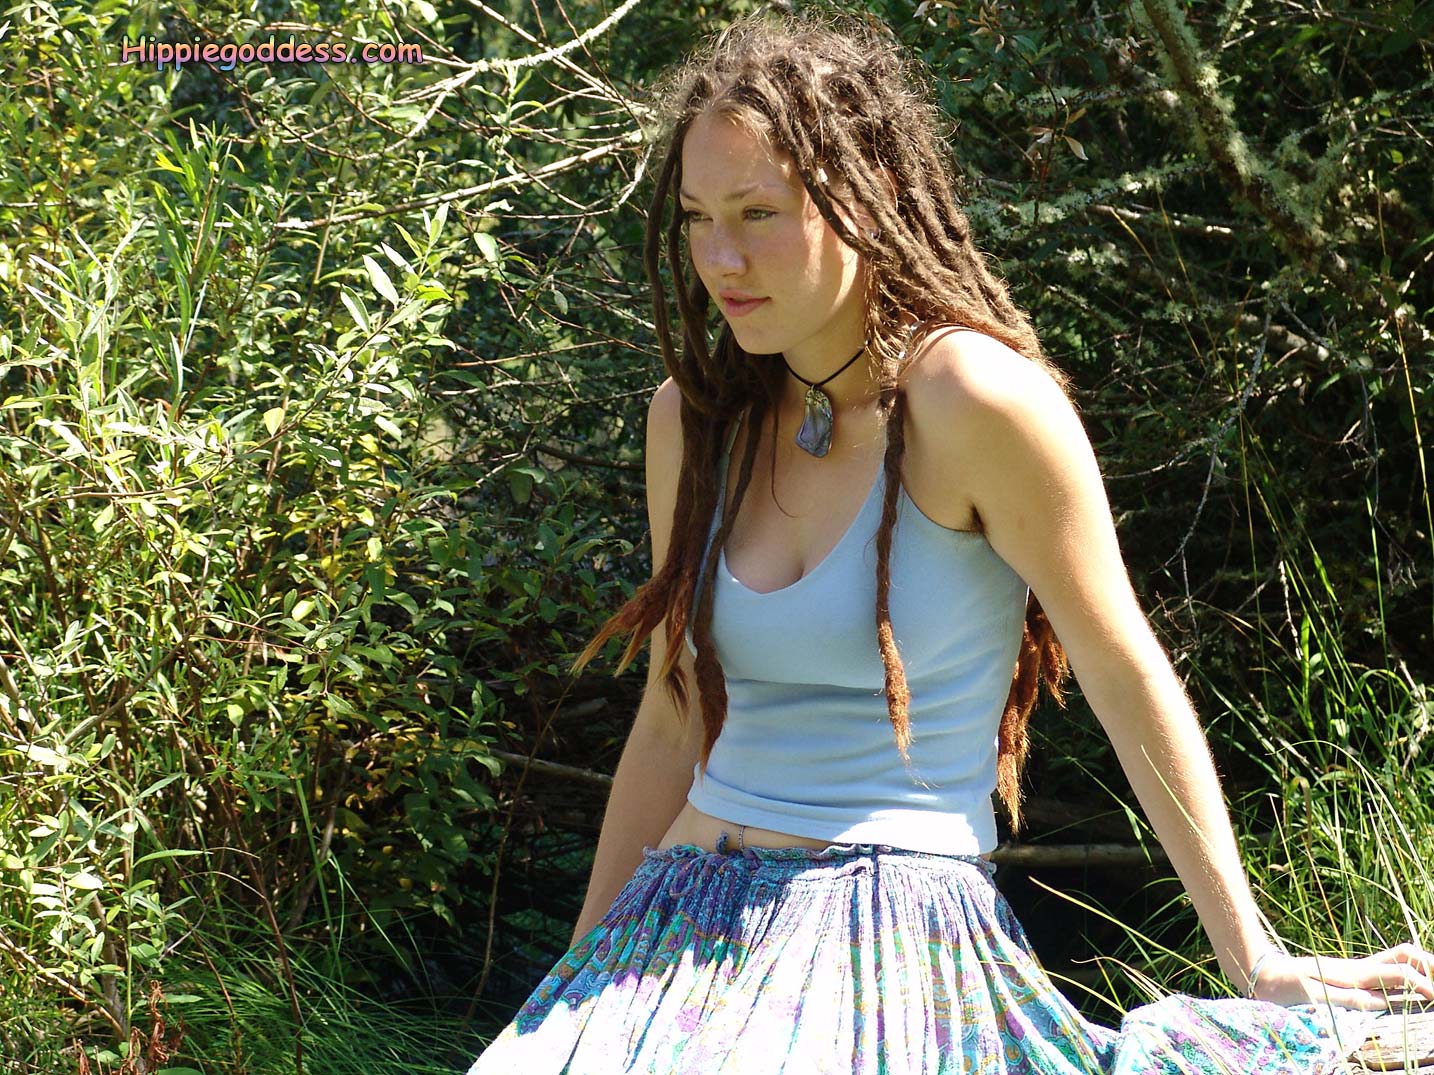 Tits Girls With Dreadlocks - Long dreadlocks, beautiful, hippie girl with hairy pits and full bush,  outdoors.